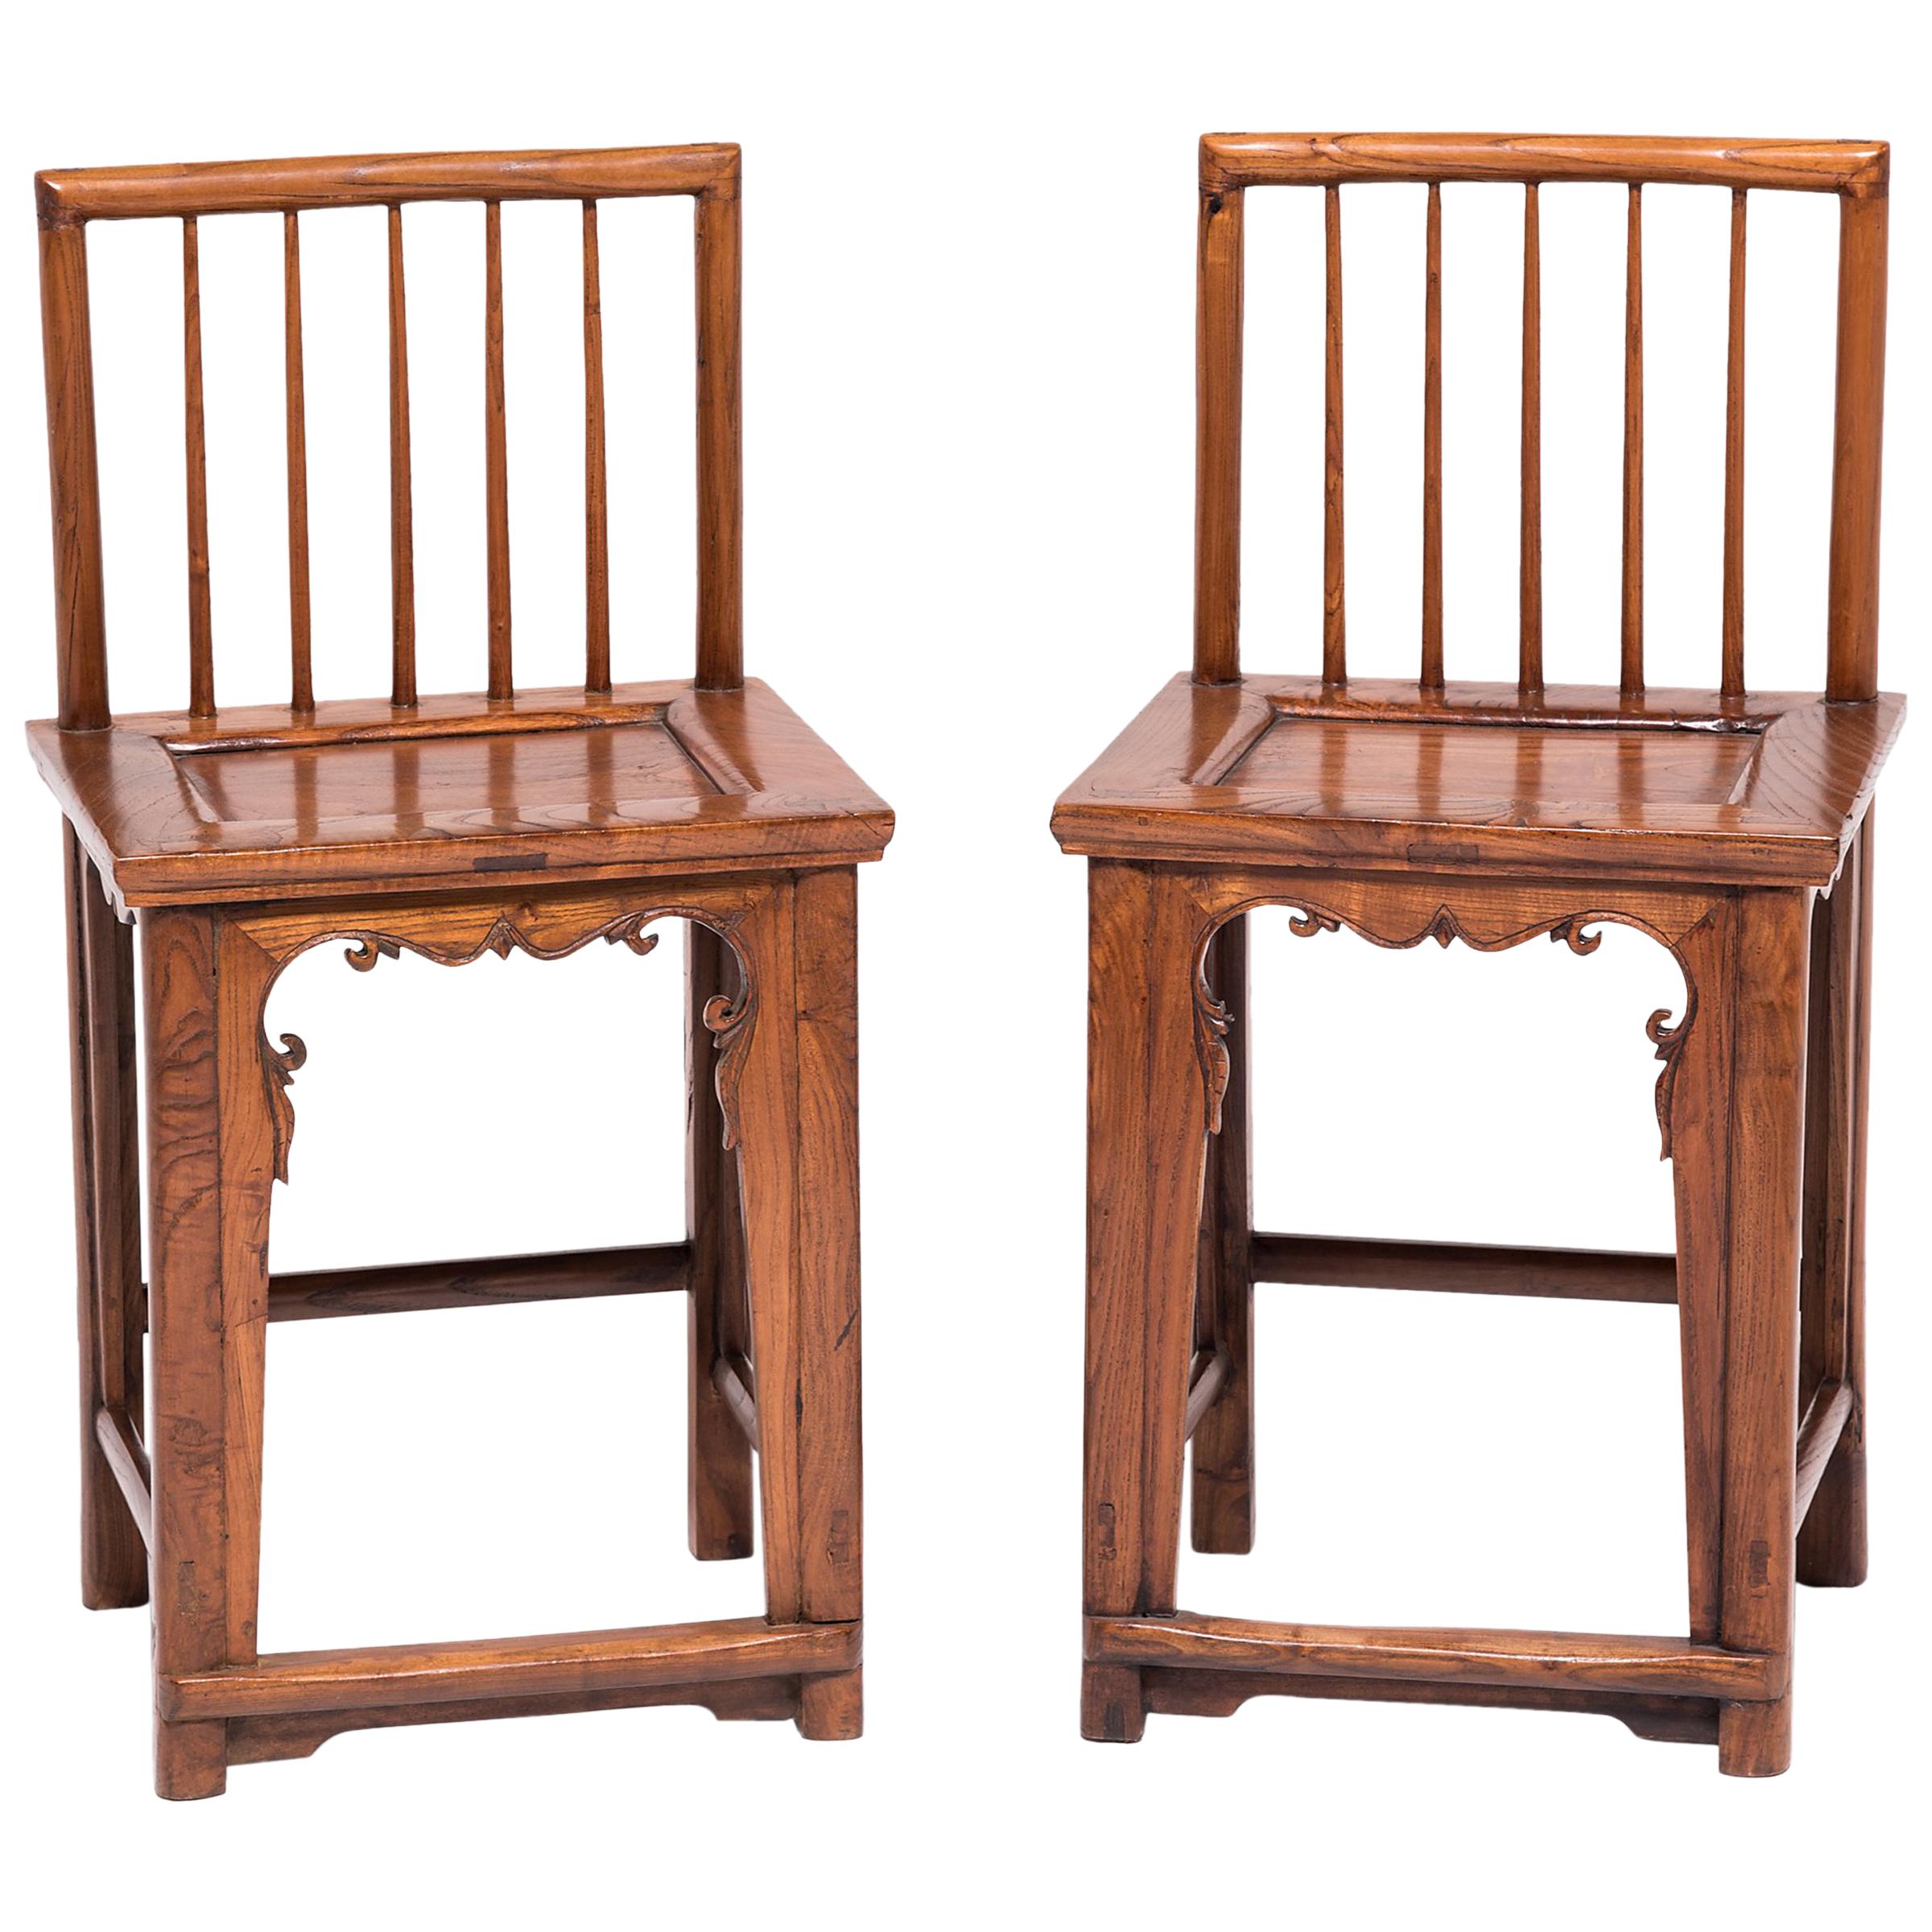 Pair of Chinese Walnut Spindleback Chairs, c. 1900